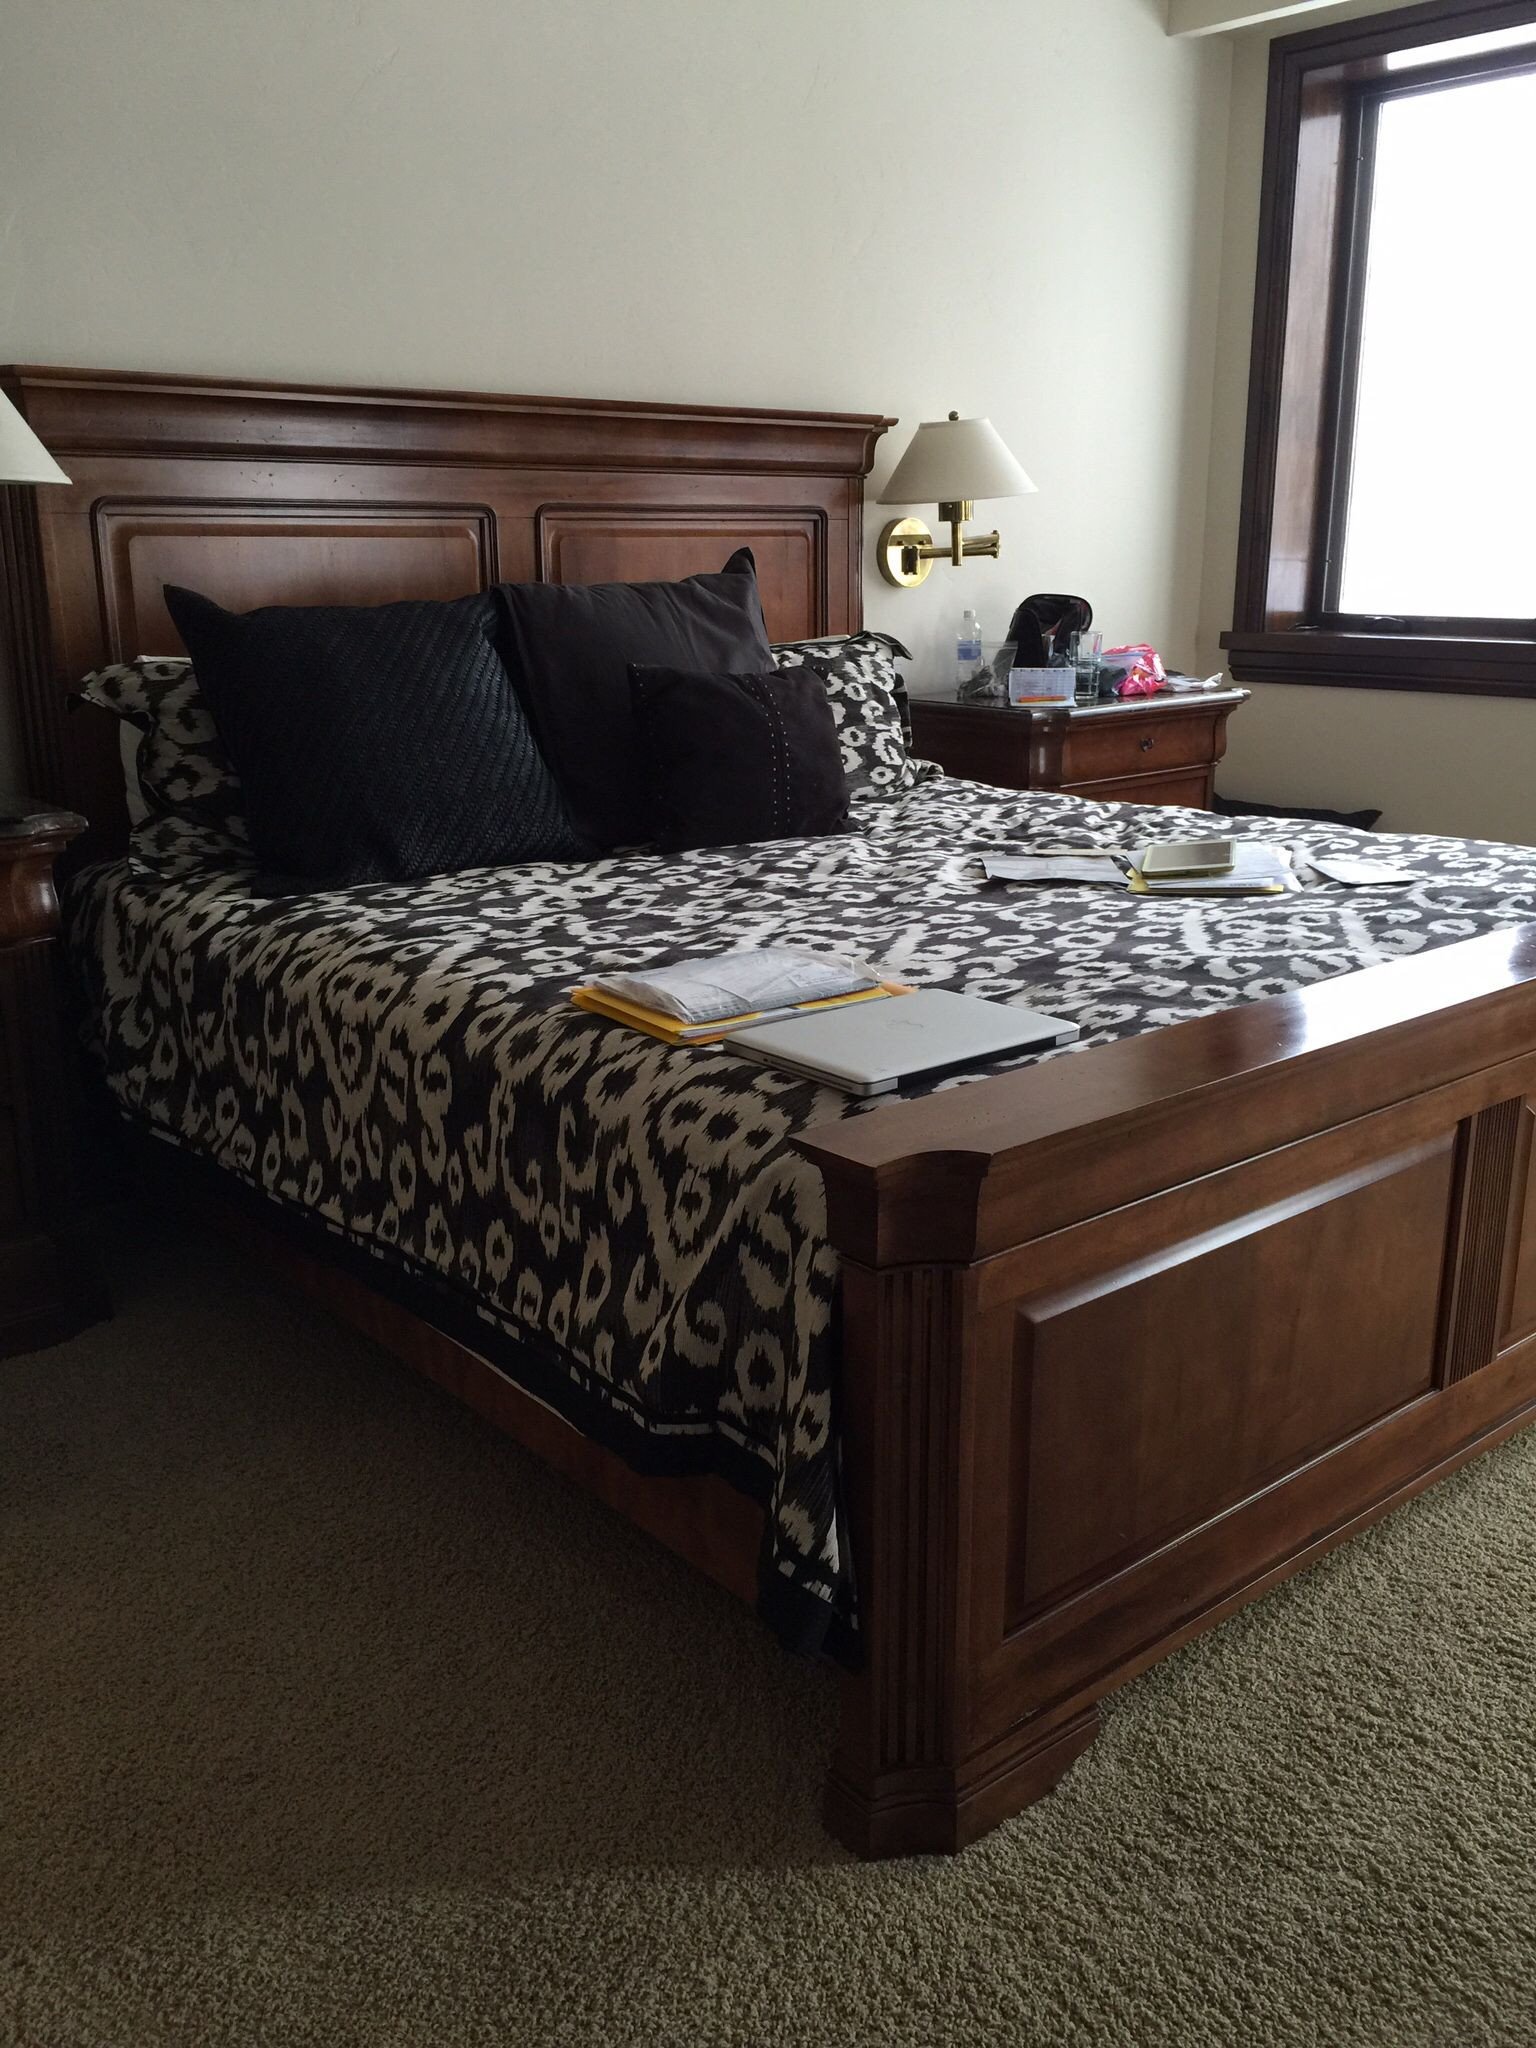 King Size Bedroom Ideas Awesome Dark Wood King Size Bed Frame